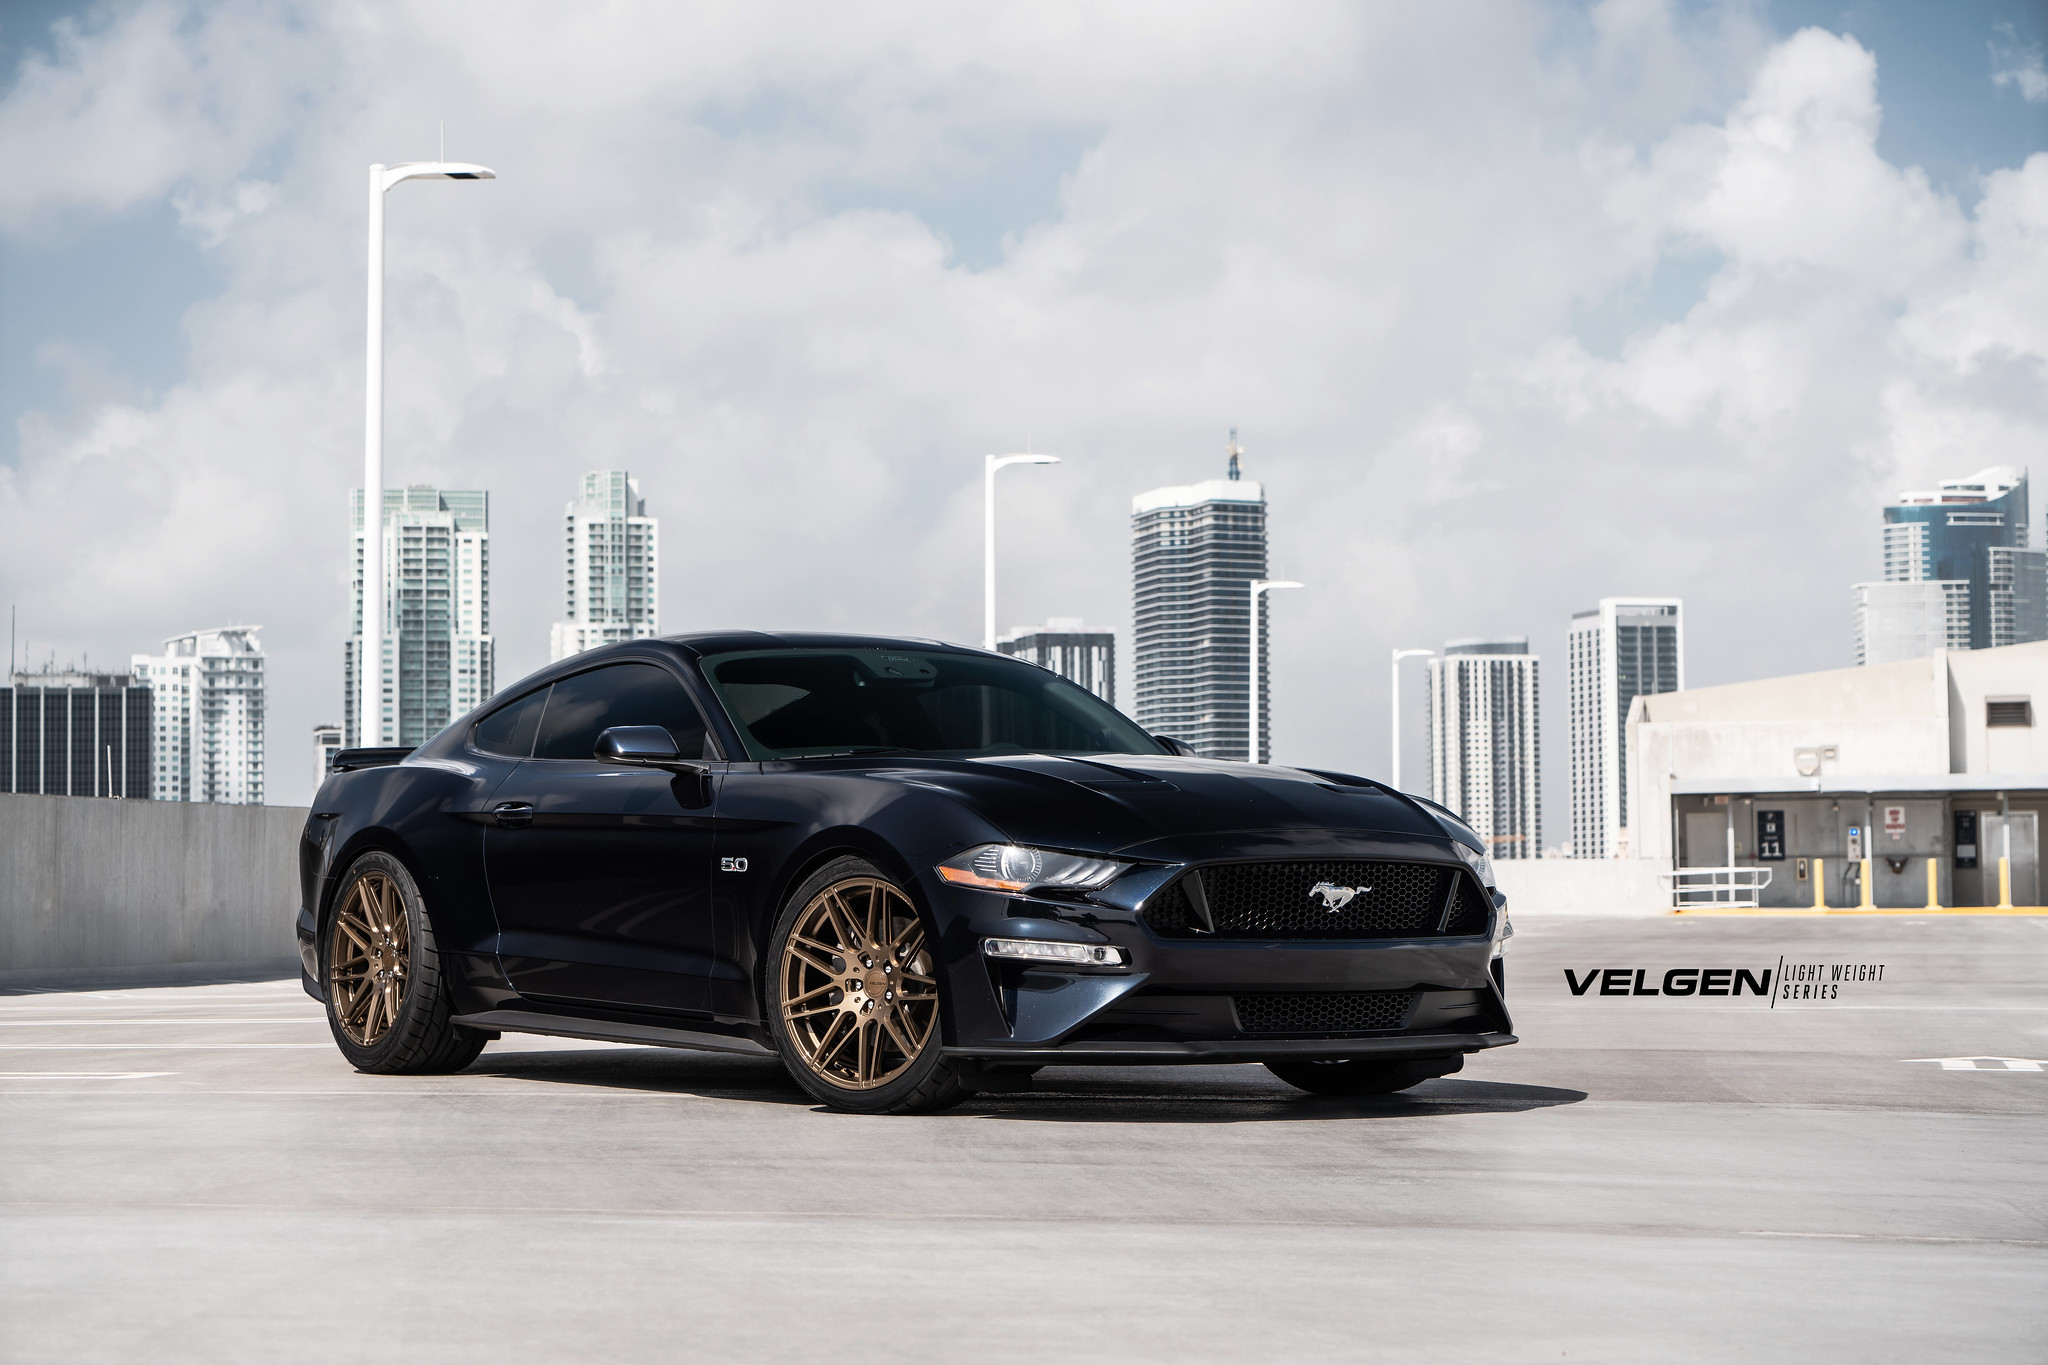 S650 Mustang Velgen wheels for your S650 Mustang | Vibe Motorsports 51633415586_73f135a8f5_k